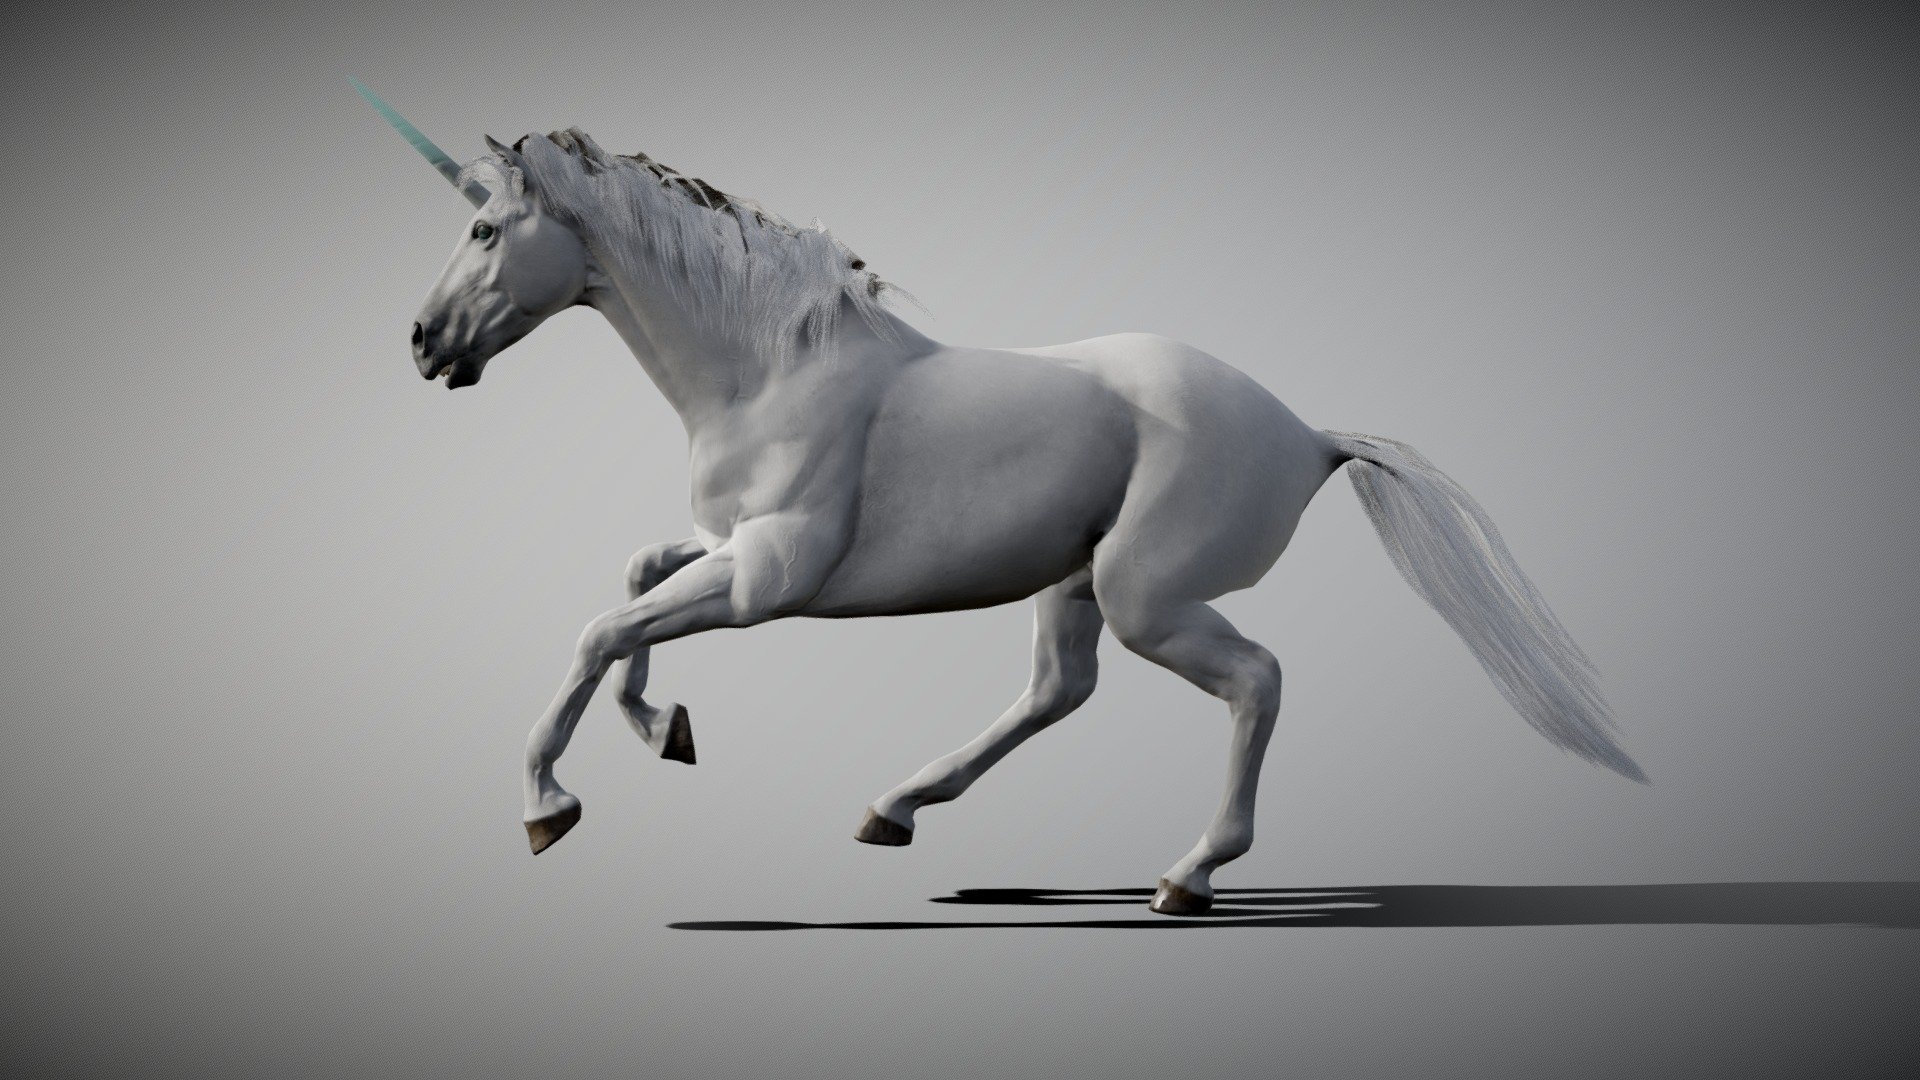 Unicorn, created in Blender, Zbrush Core and Substance Painter original blender file in the Zip folder uploaded!

Textures 4096x4096:* - body: albedo, roughness, Ambient occlusion, normal, - eyes and teeth: albedo, roughness, Ambient occlusion, normal, opacity - mane and tail: color node, normal and opacity, -horn: albedo, roughness, Ambient occlusion, normal, emissive

In the NLA editor there are 3 option: - walk cycle - run cycle - Unicorn - Buy Royalty Free 3D model by creatureFab (@3dCoast) 3d model